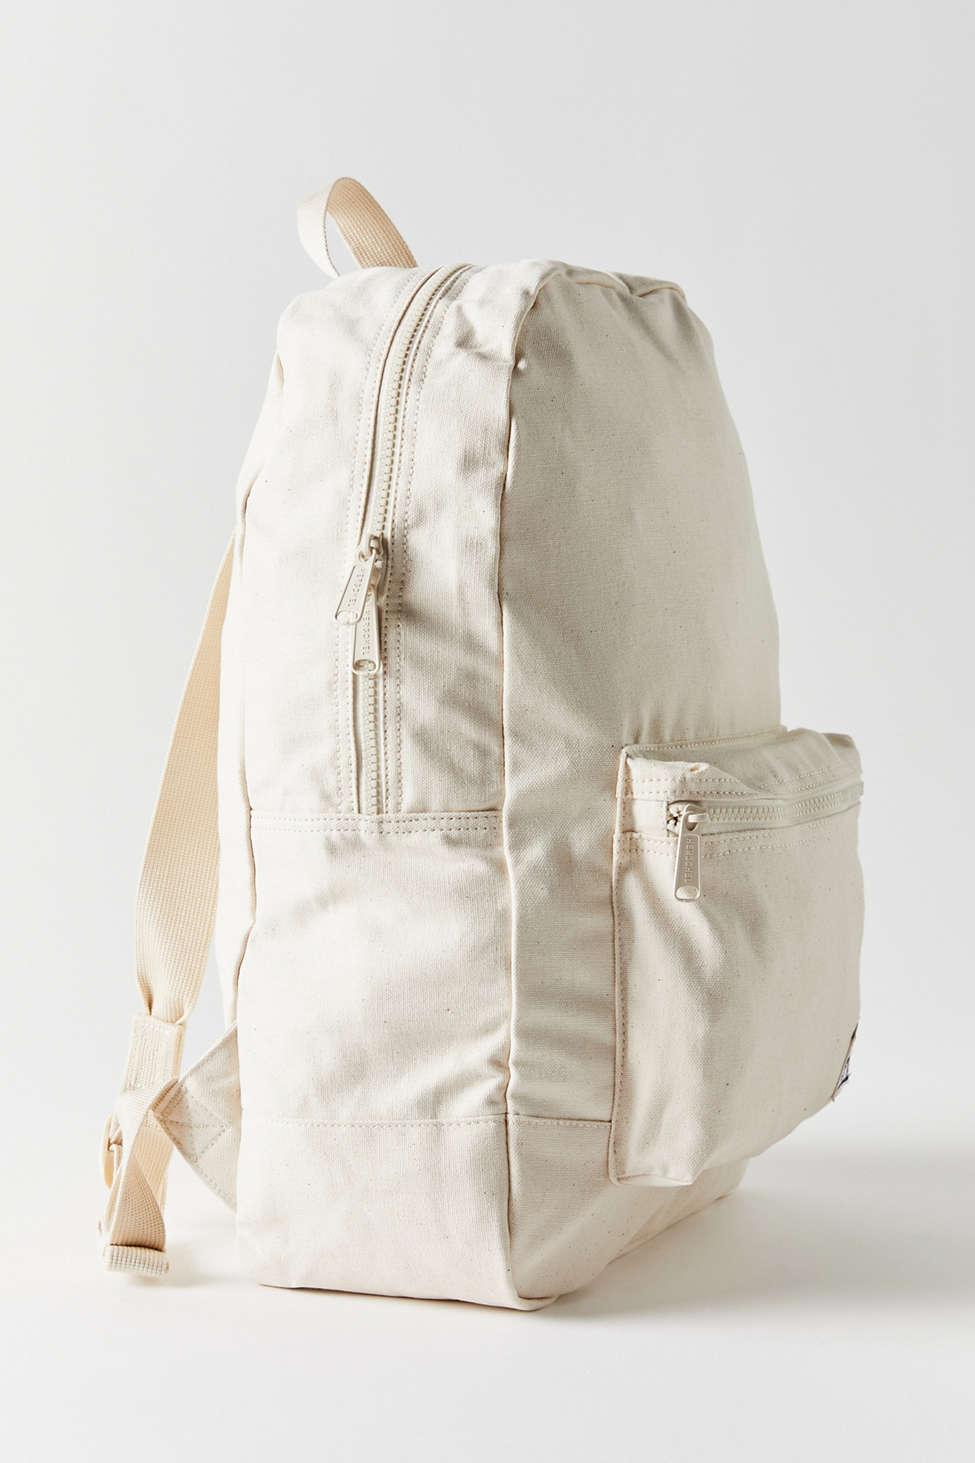 Herschel Supply Co. Daypack Cotton Casuals Backpack | Lyst